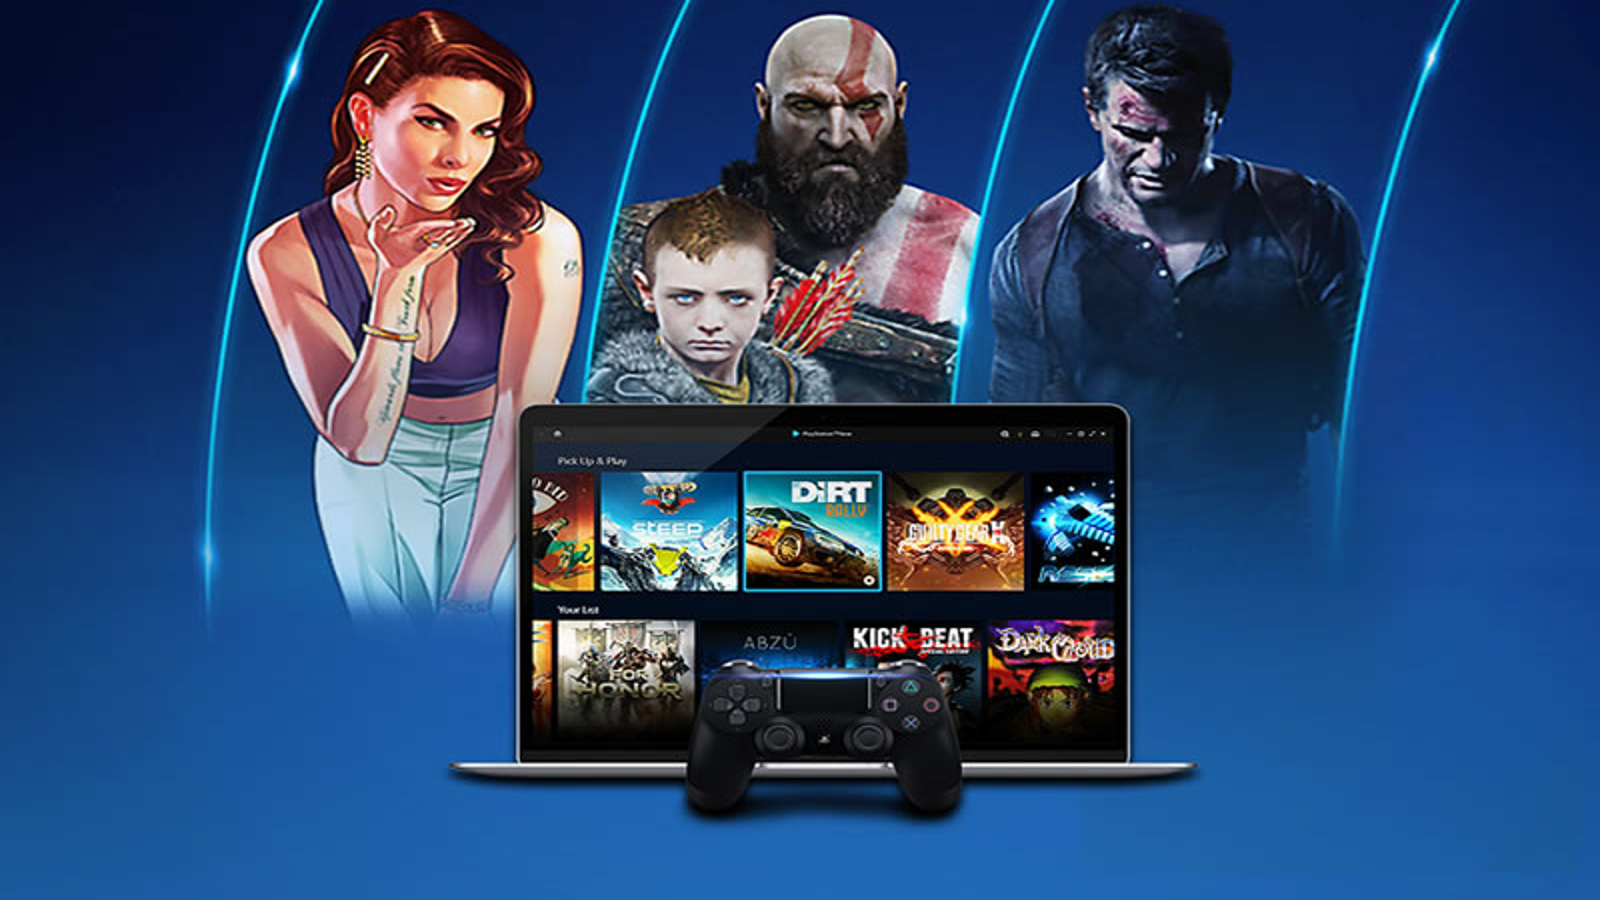 PlayStation Plus Premium Includes Streaming On PC